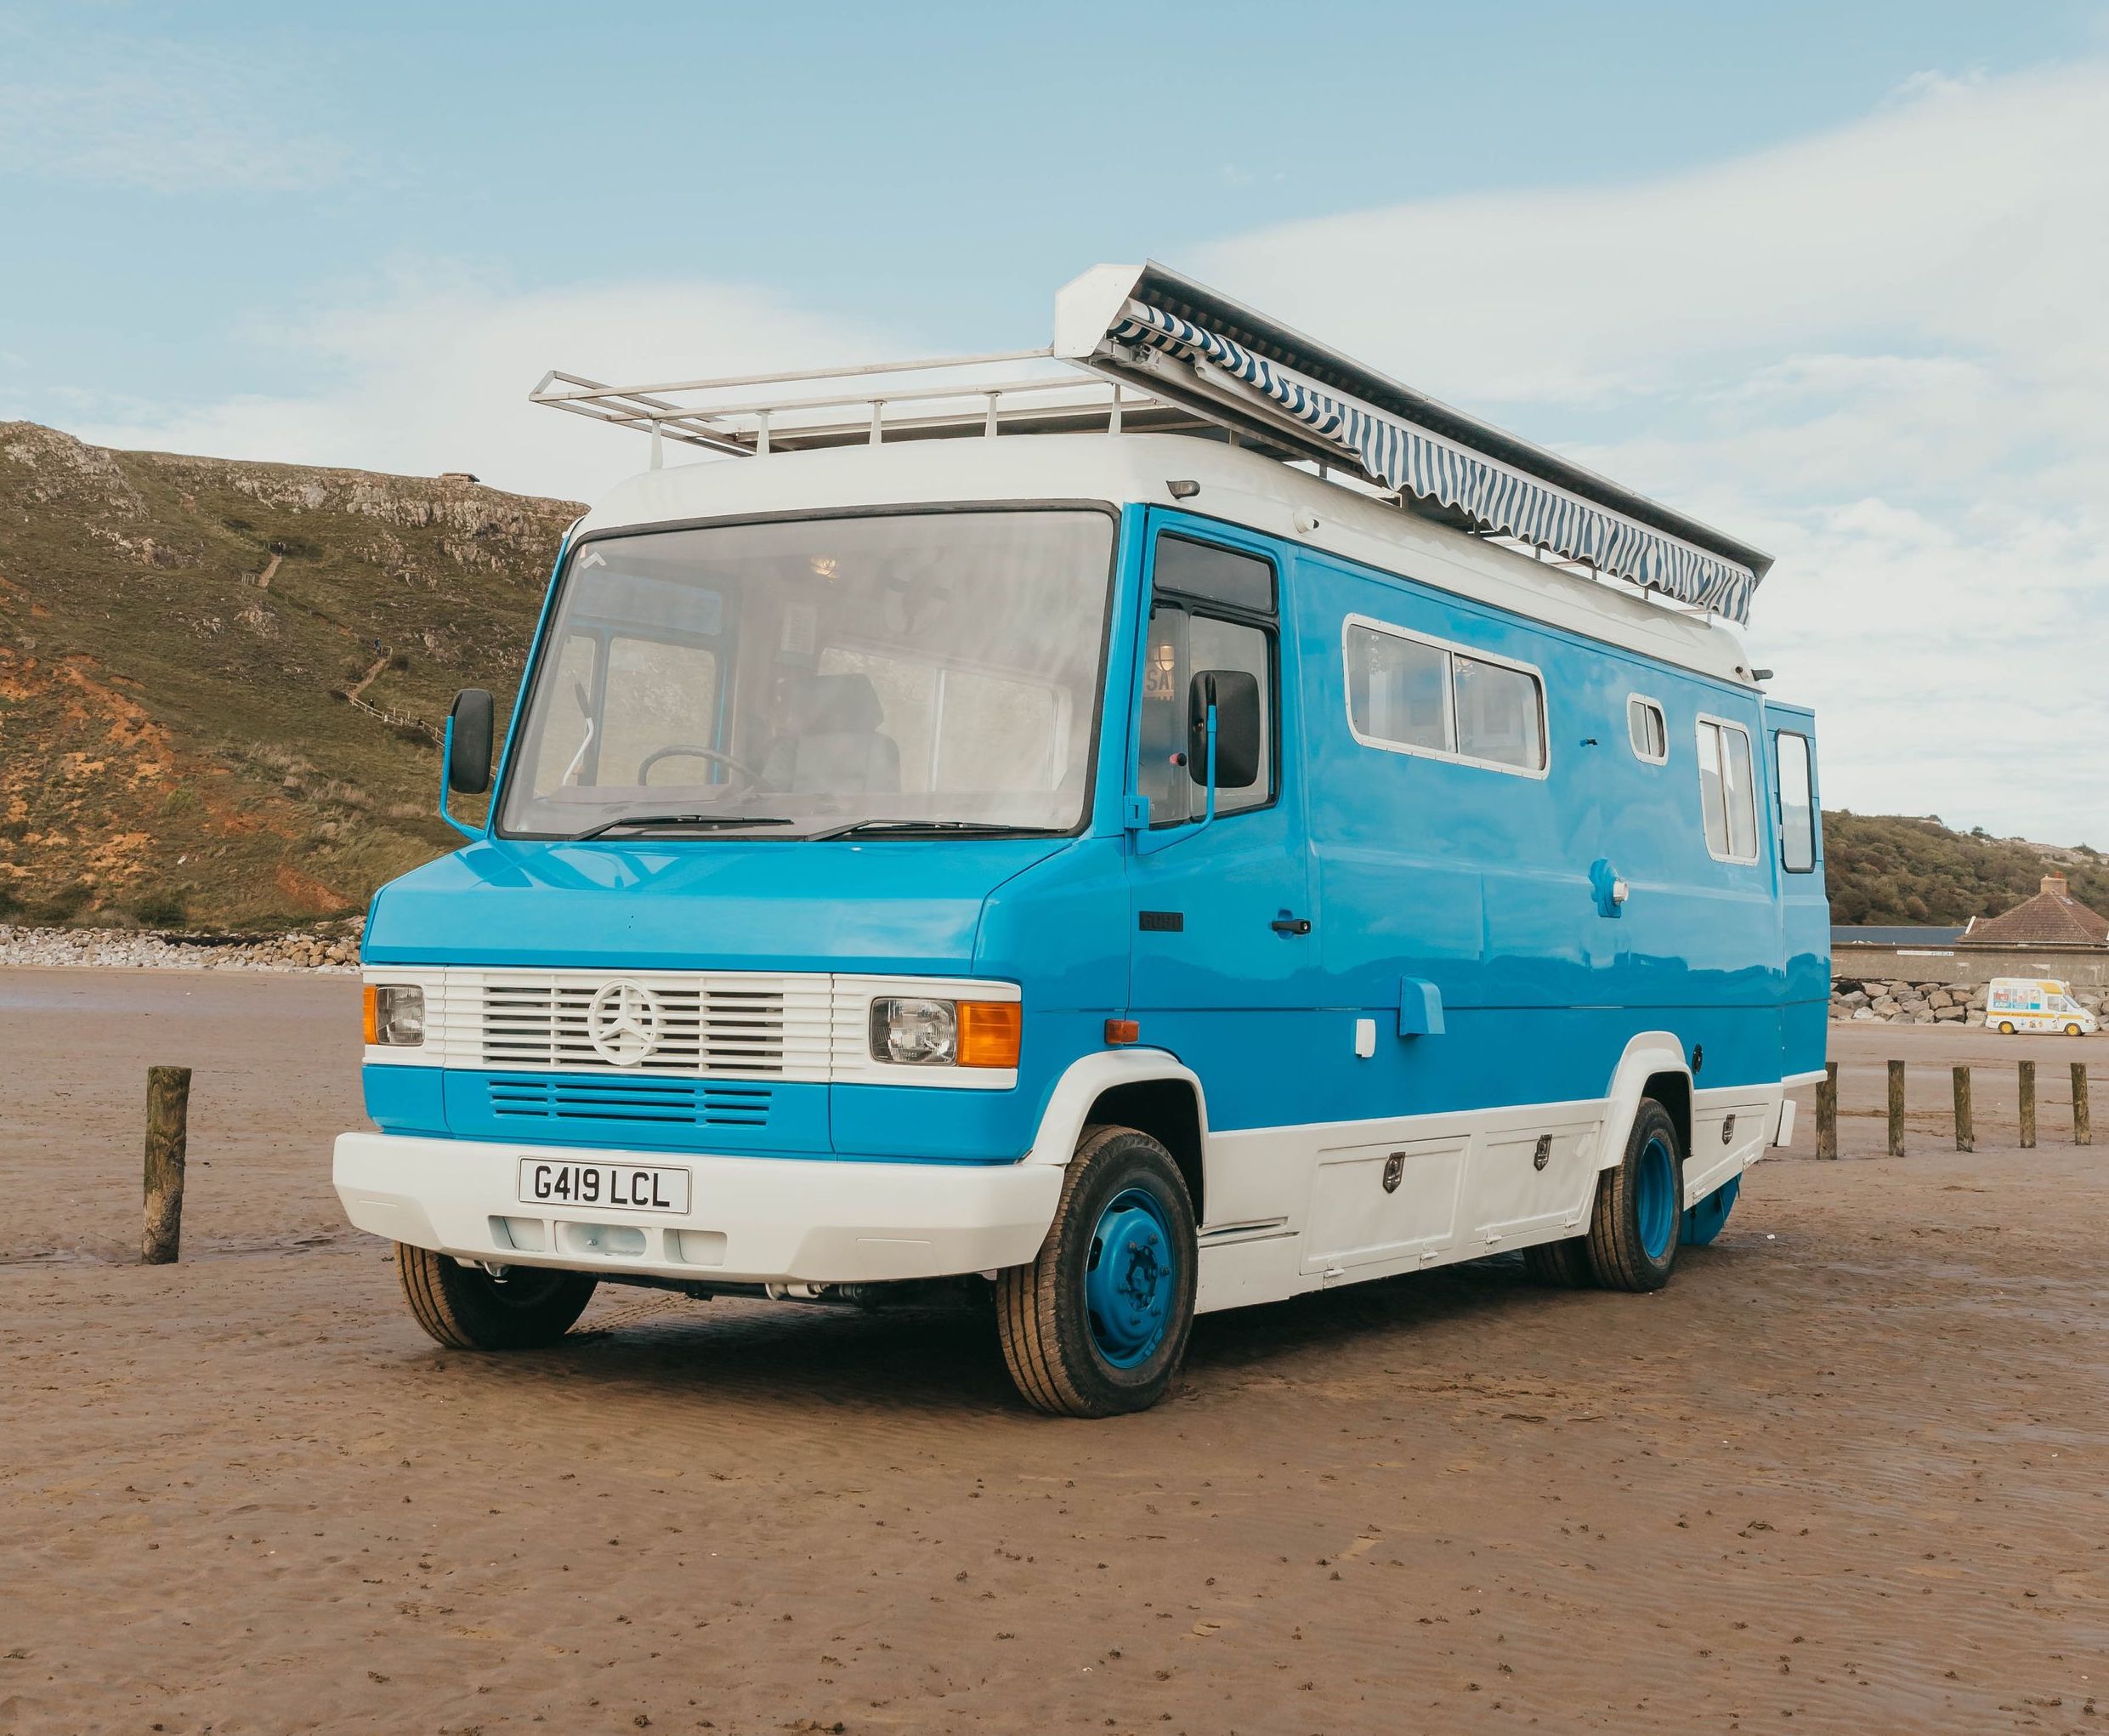 A blue camper van with white trim, large windows, an awning, and a white roof rack. The camper sits on a sandy beach.